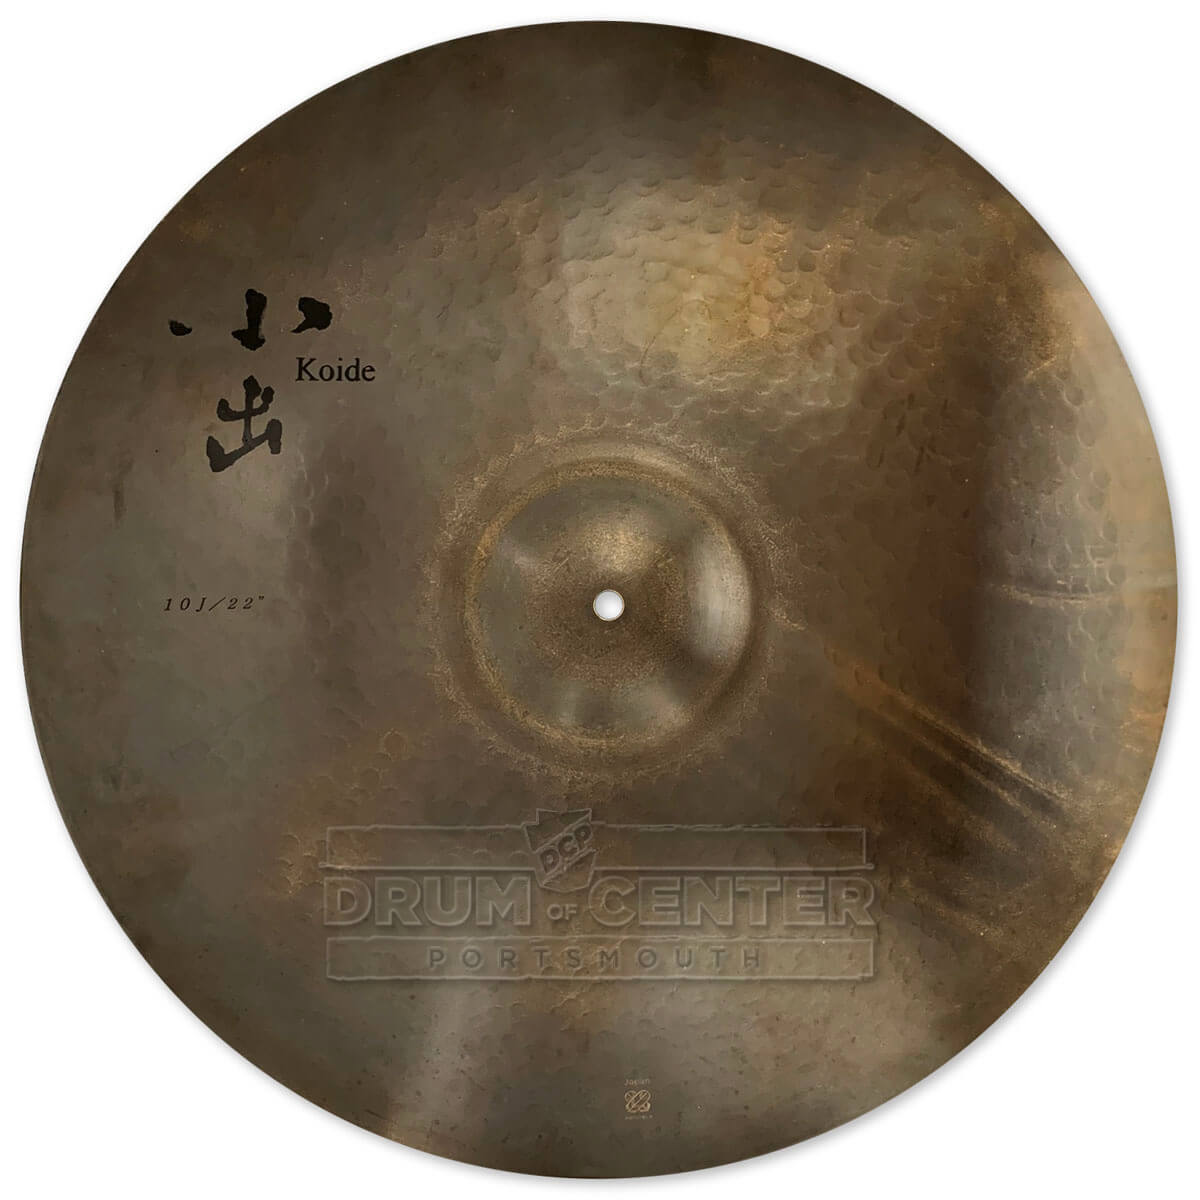 Koide 10J Turk Ride Cymbal 22" 2875 grams - Drum Center Of Portsmouth